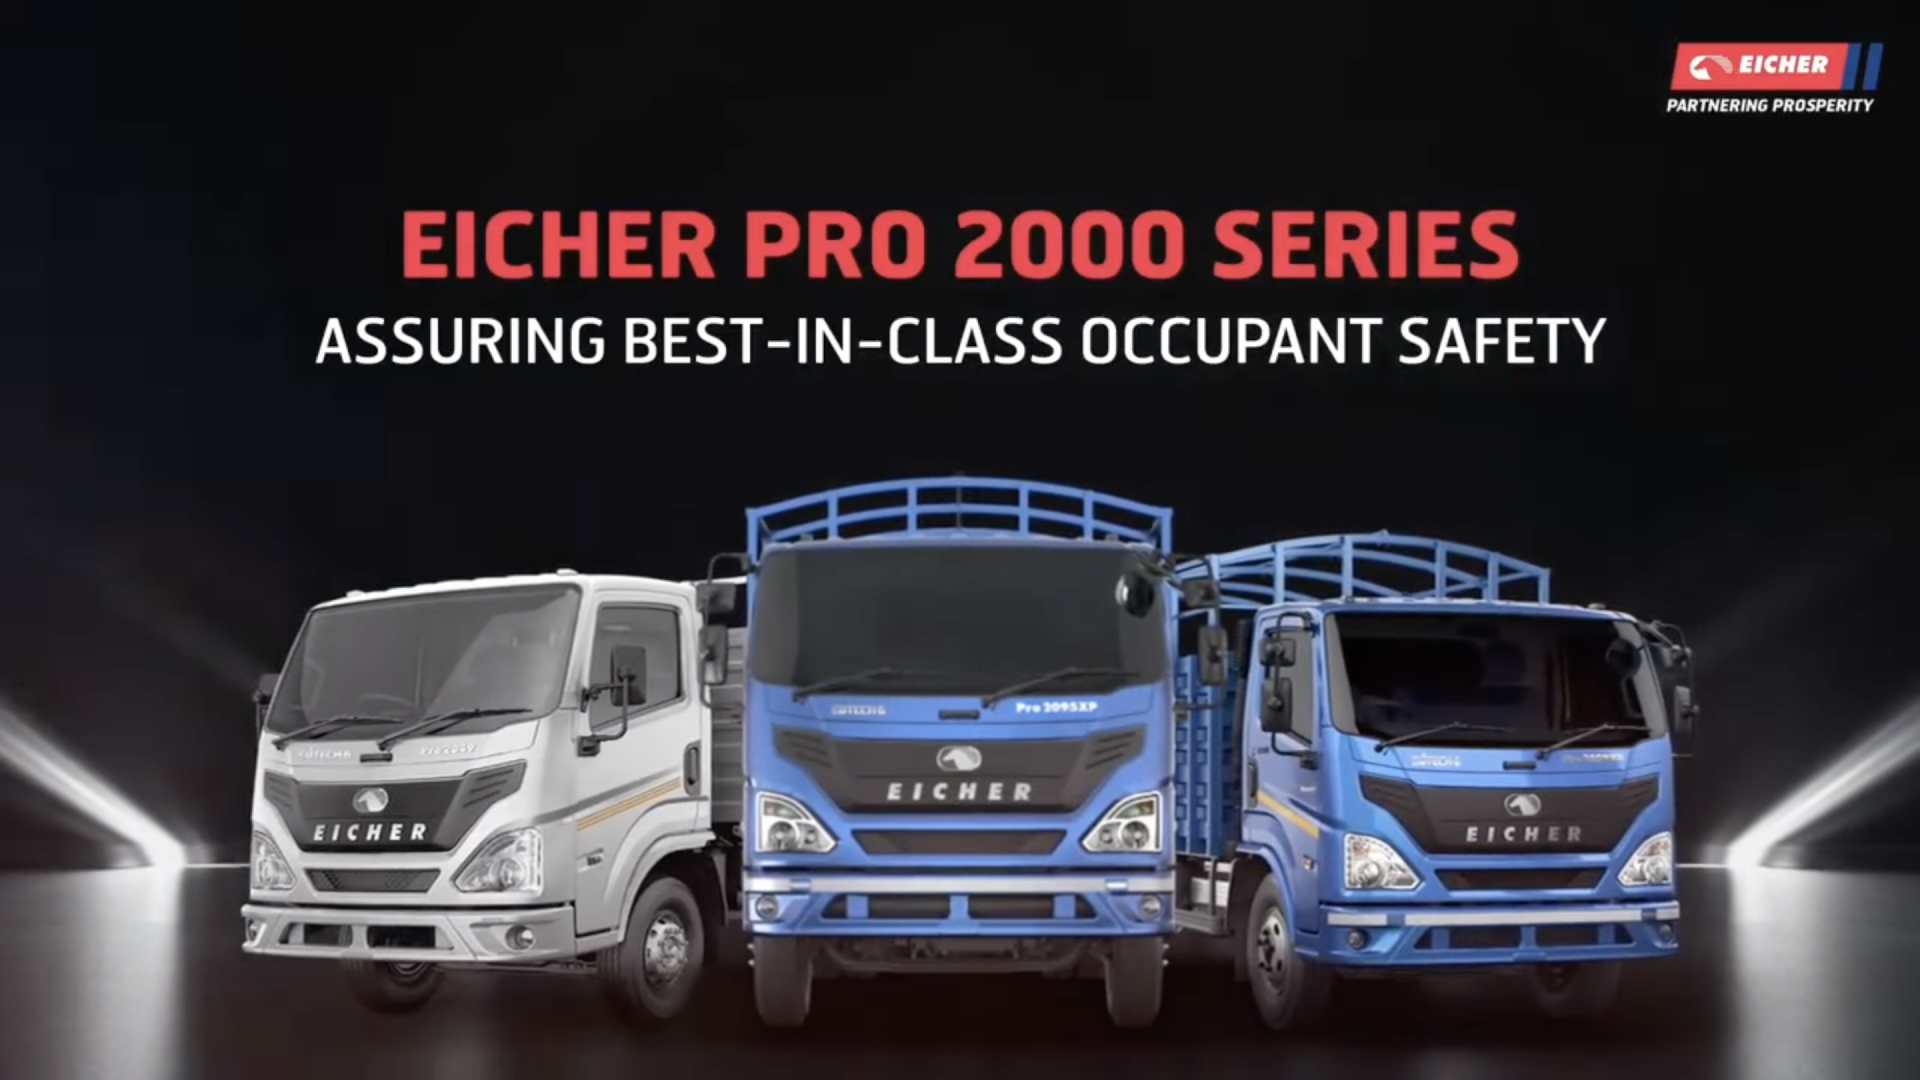 Strong Dual Panel Cabin- Pro 2000 trucks